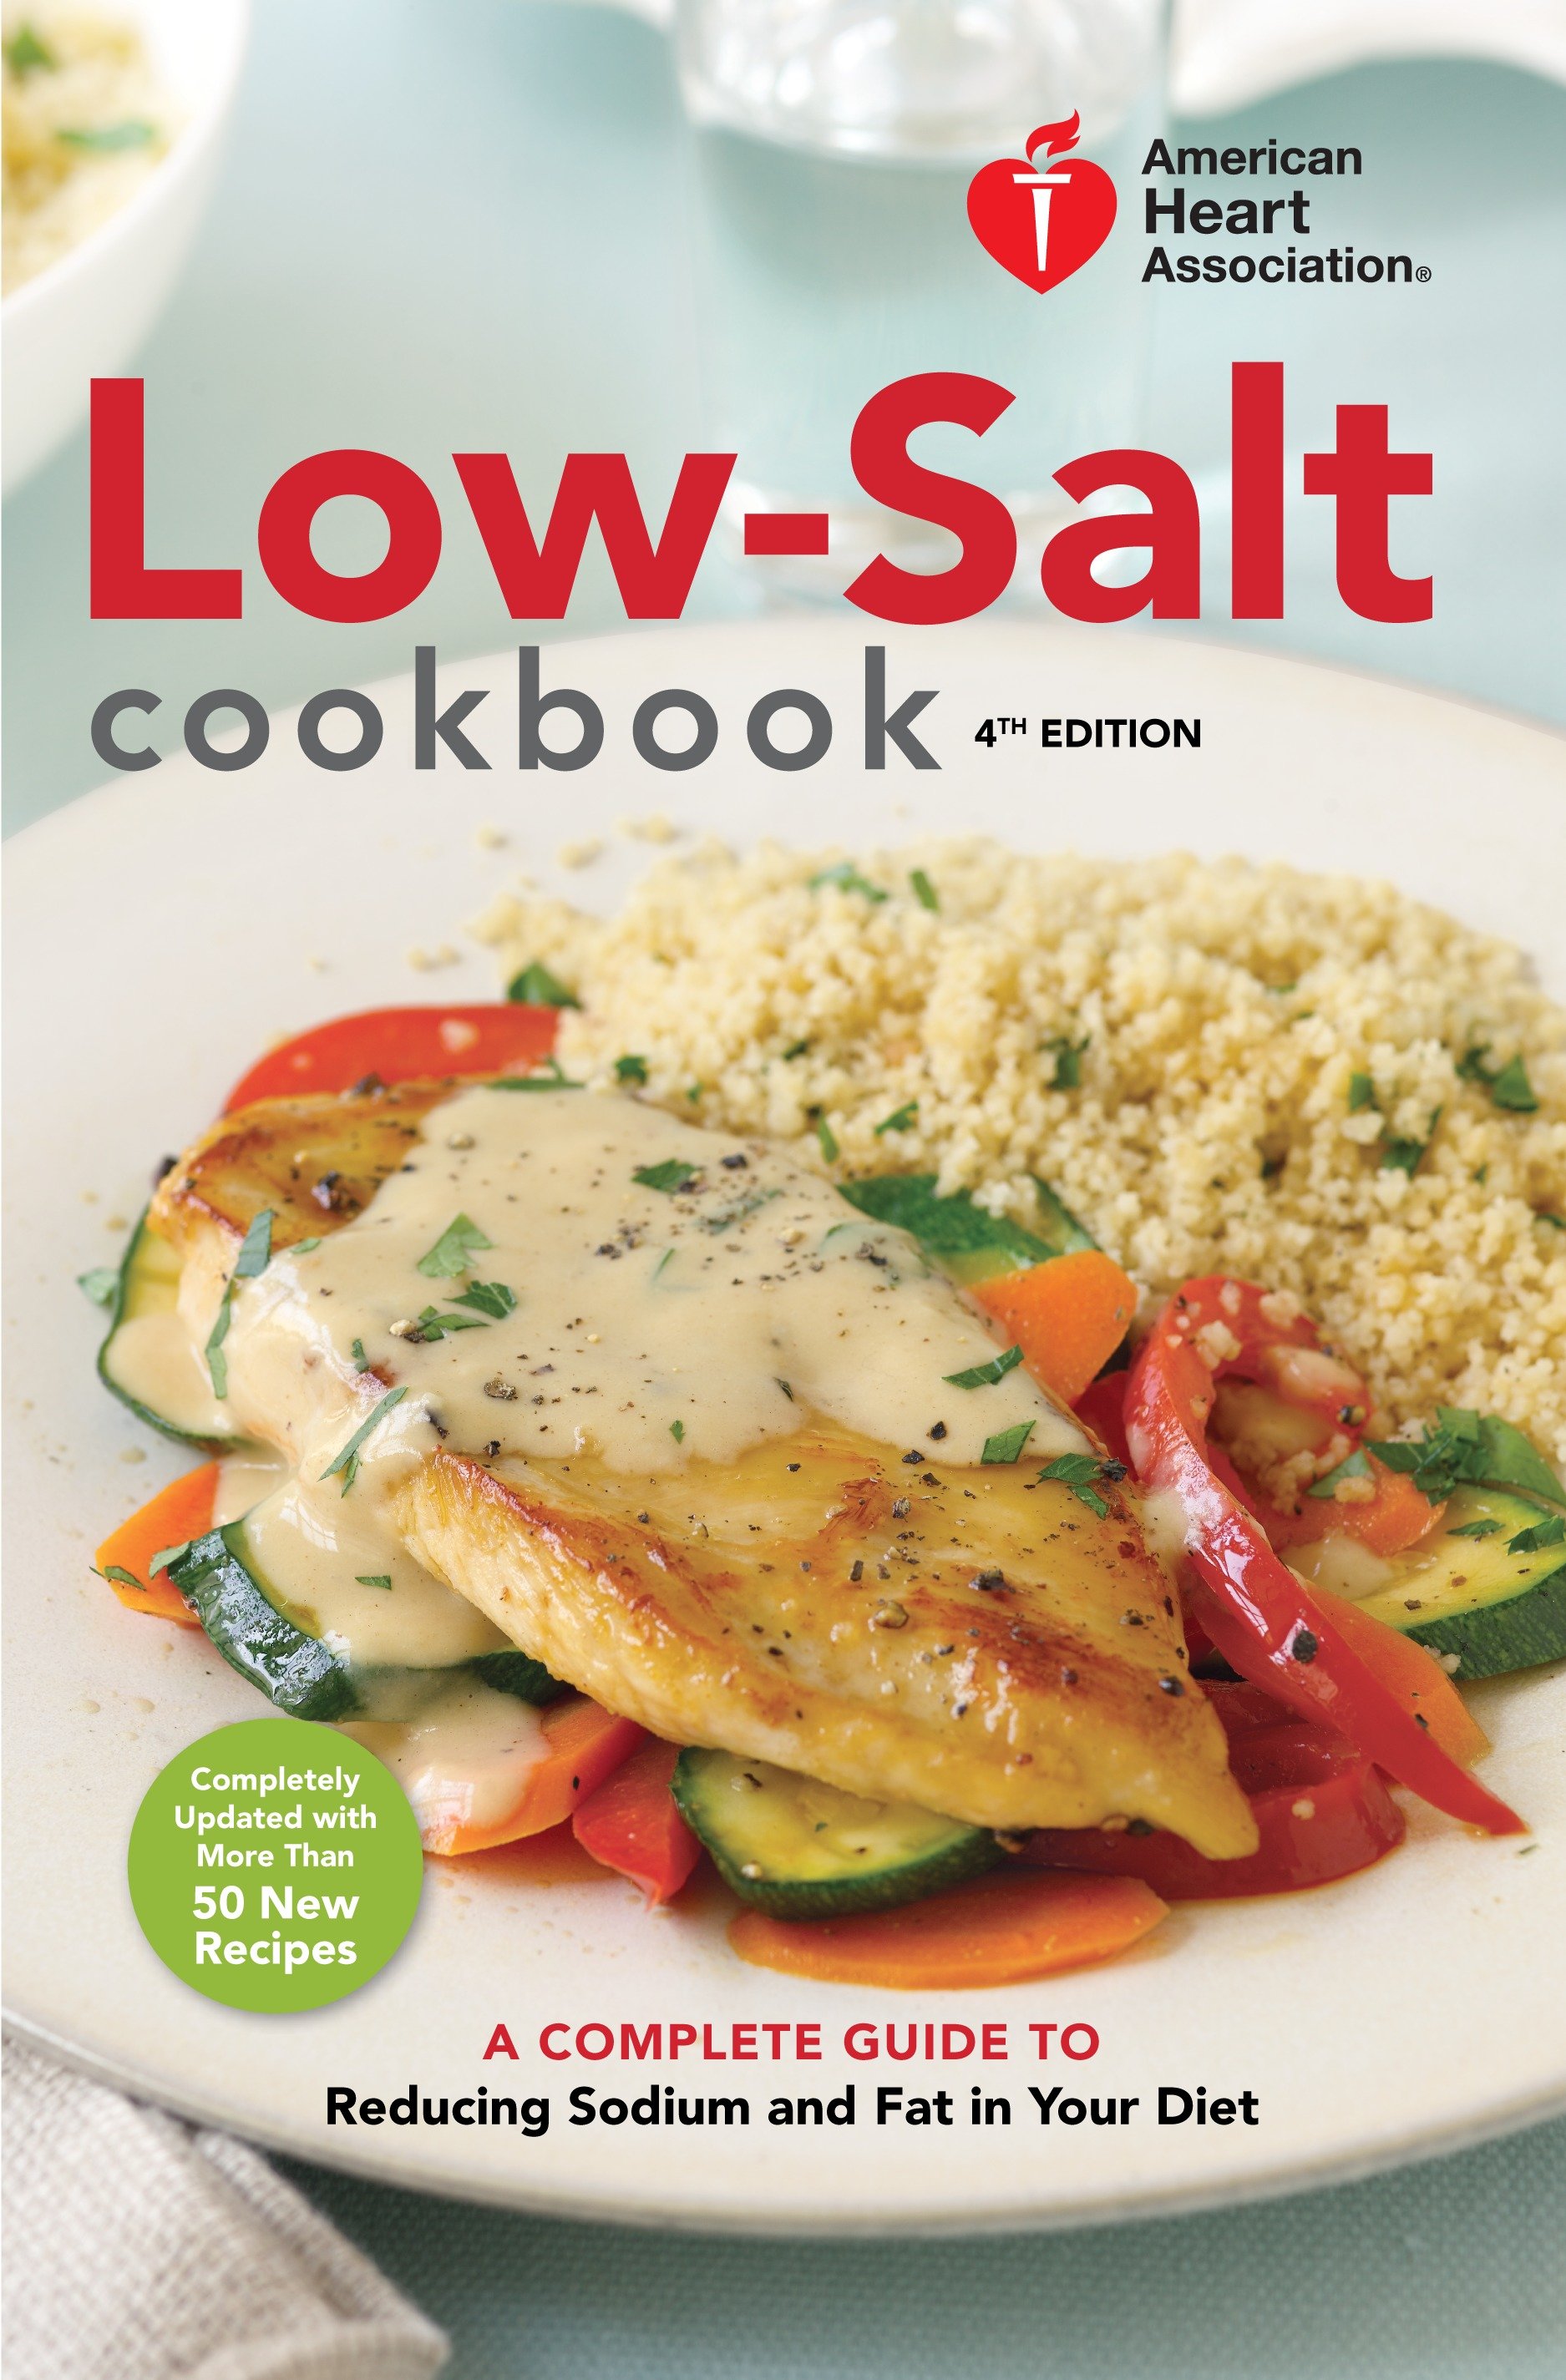 American Heart Association low-salt cookbook a complete guide to reducing sodium and fat in your diet cover image